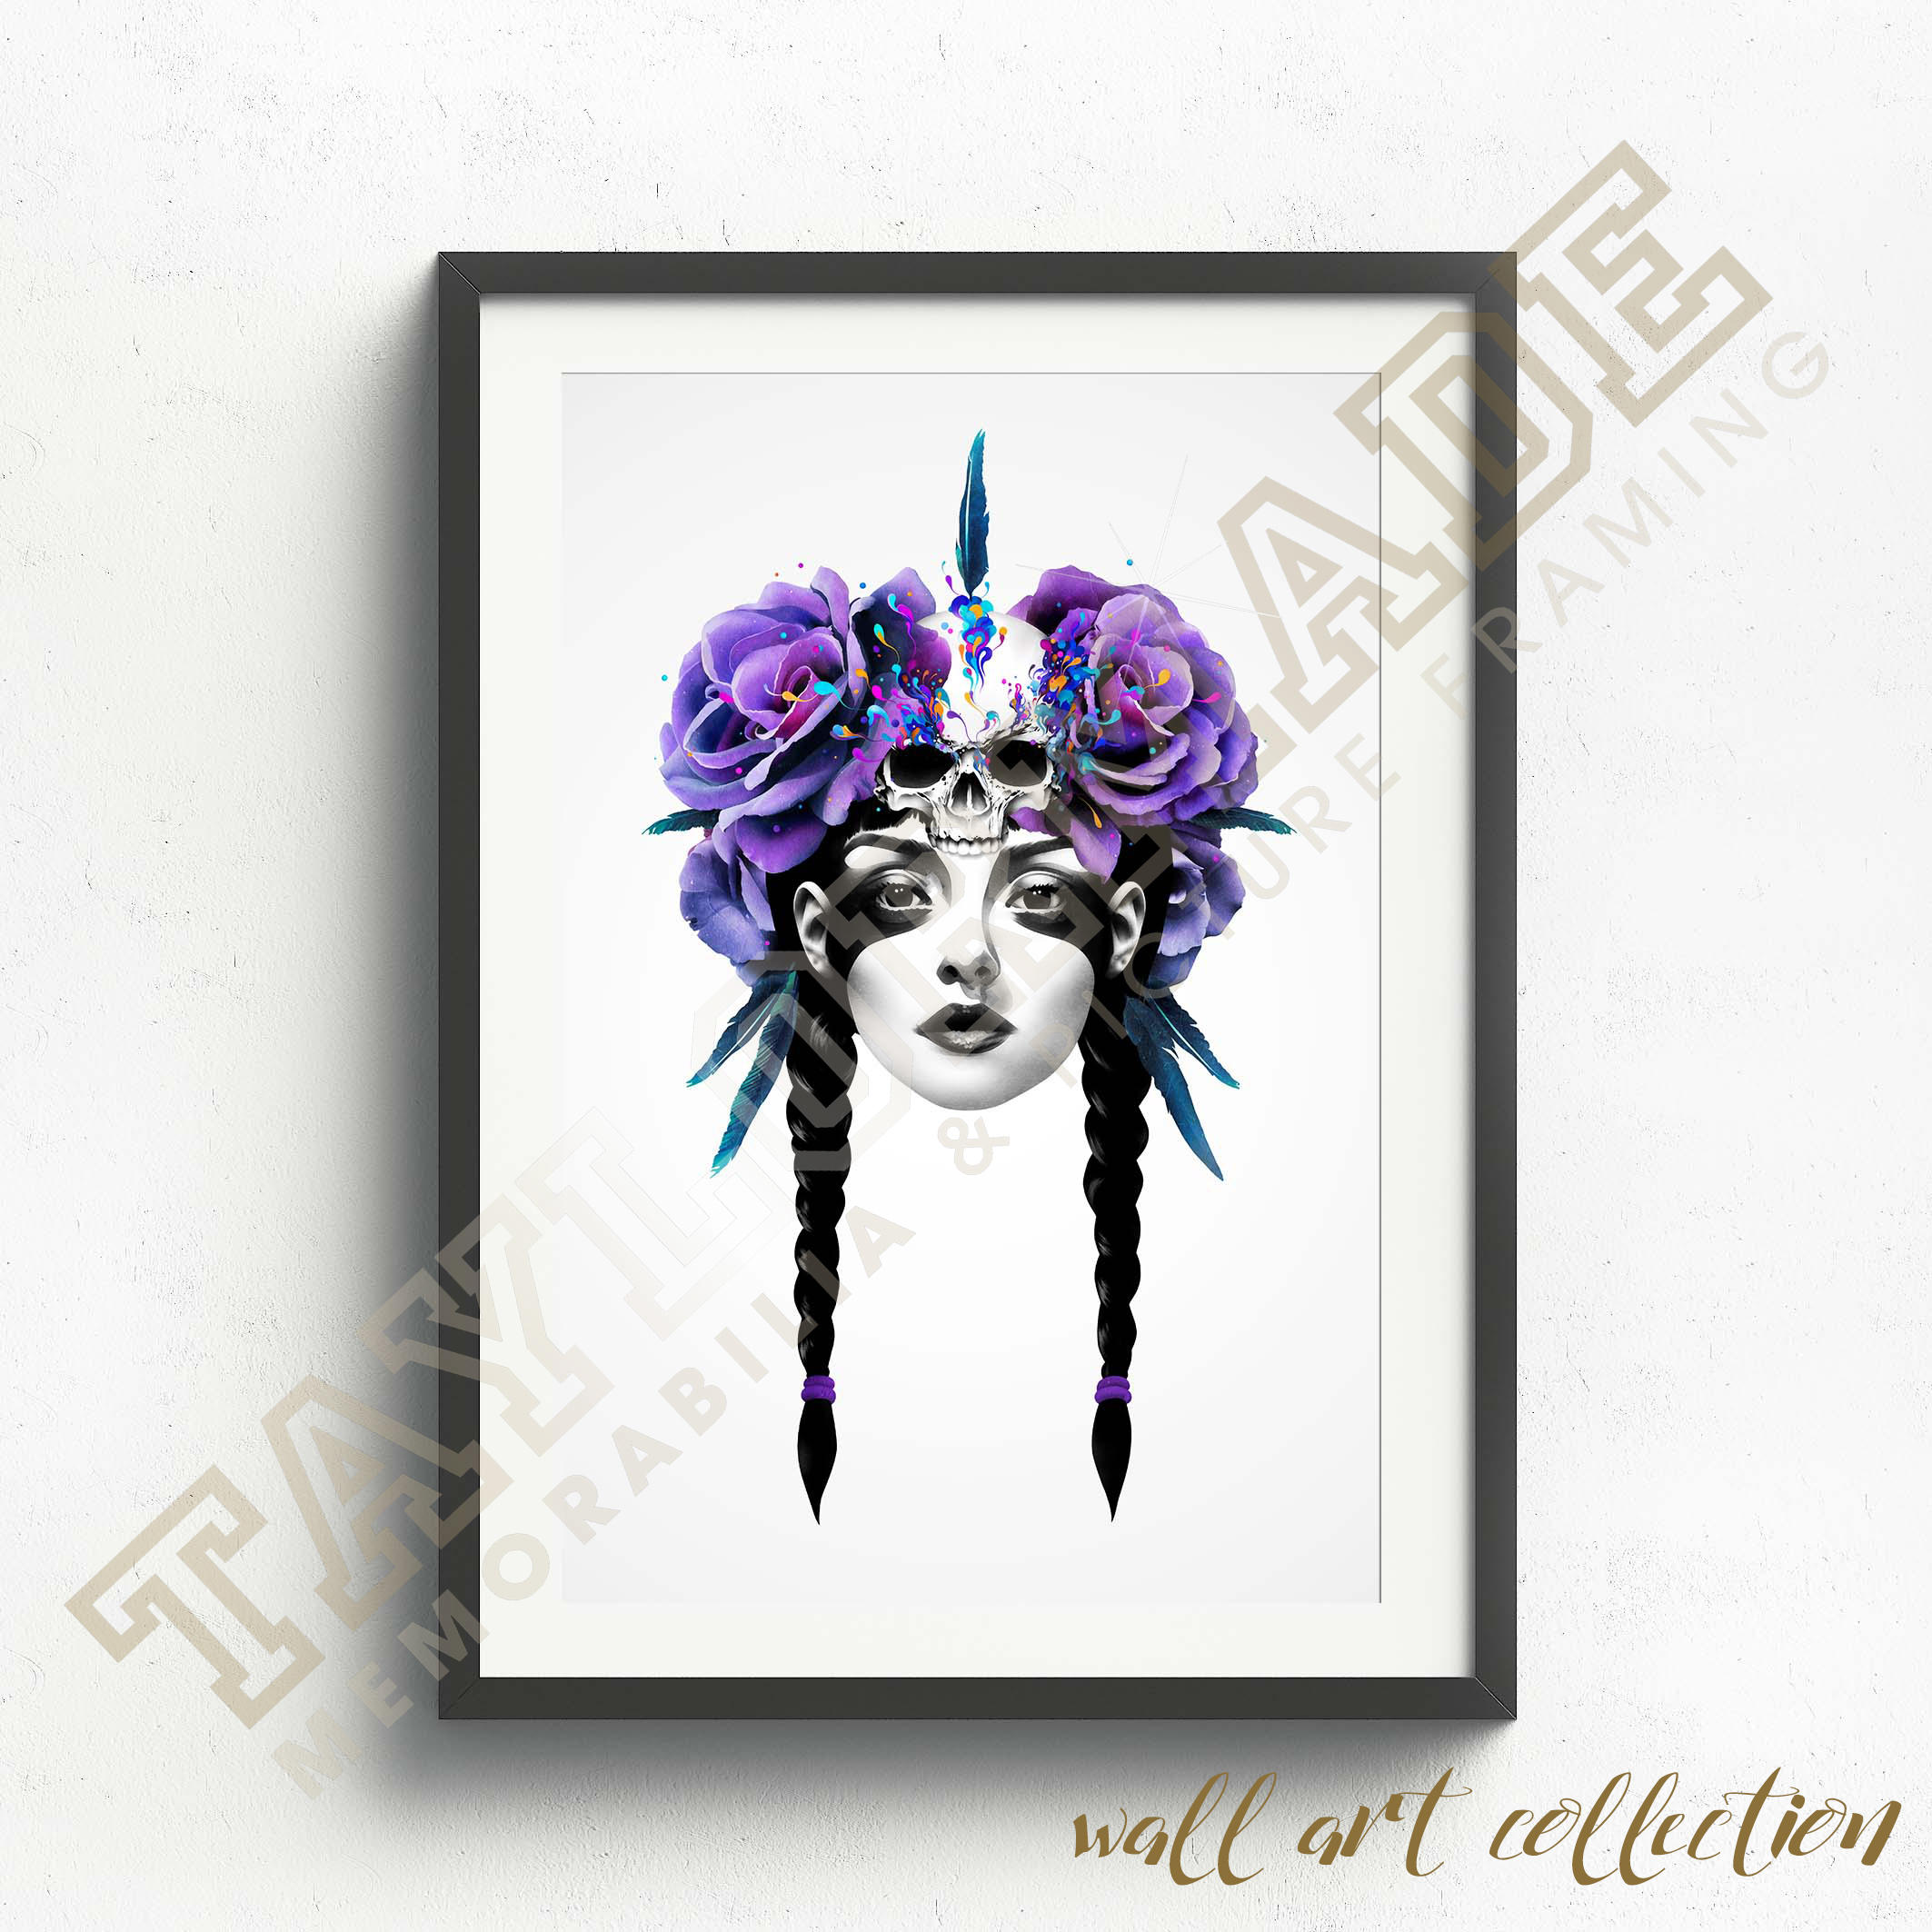 Wall Art Collection – New Wave Warrior